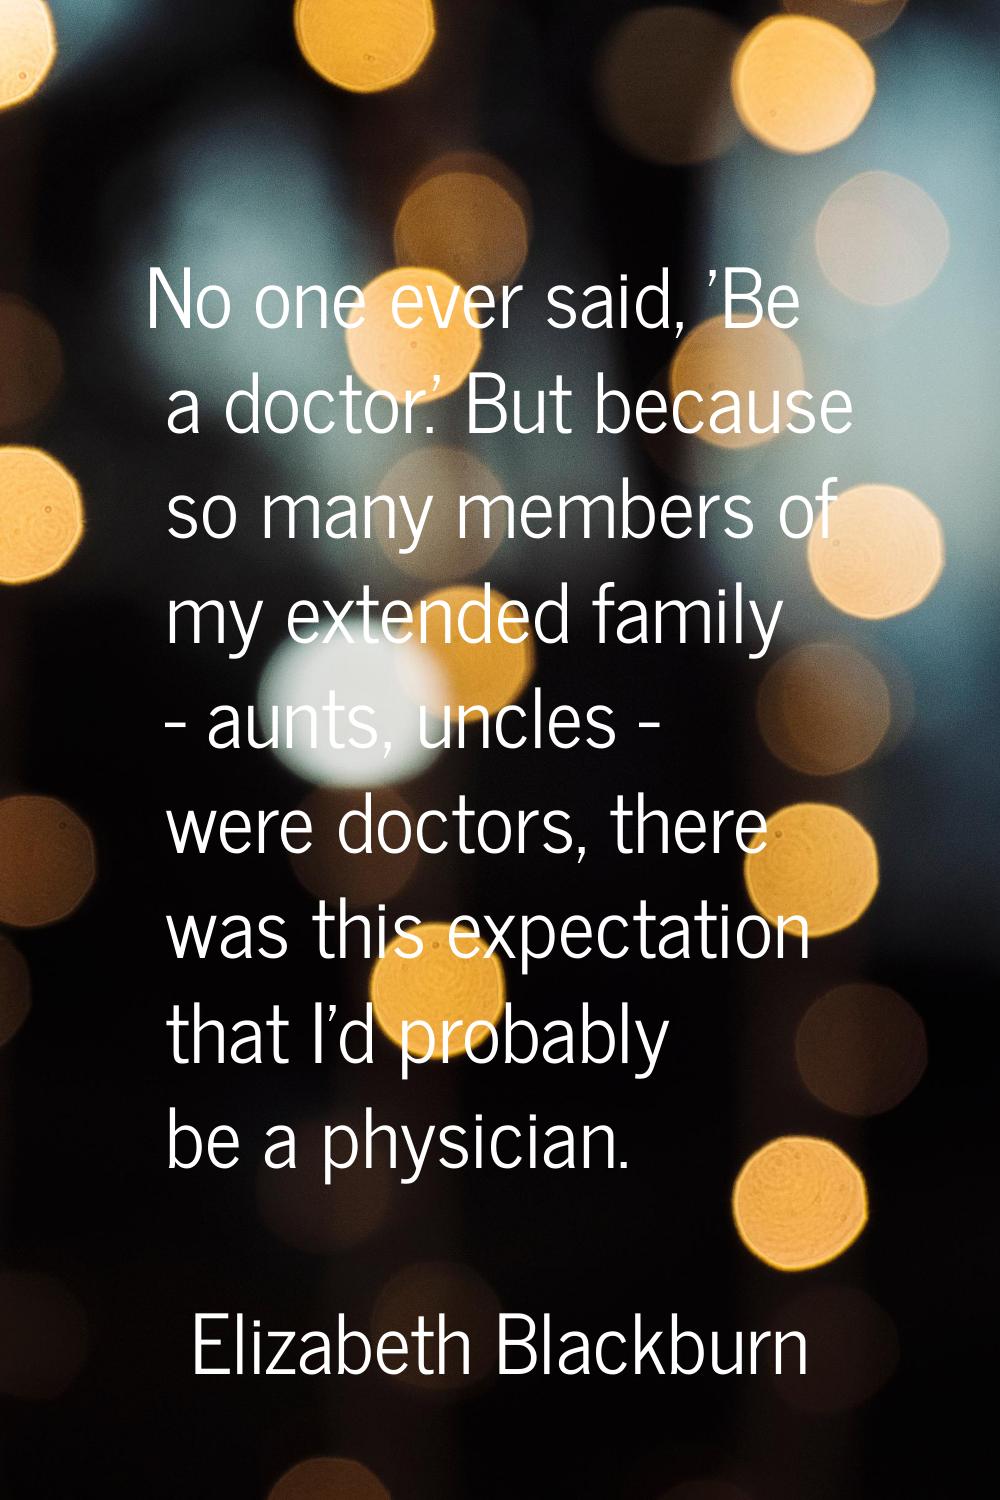 No one ever said, 'Be a doctor.' But because so many members of my extended family - aunts, uncles 